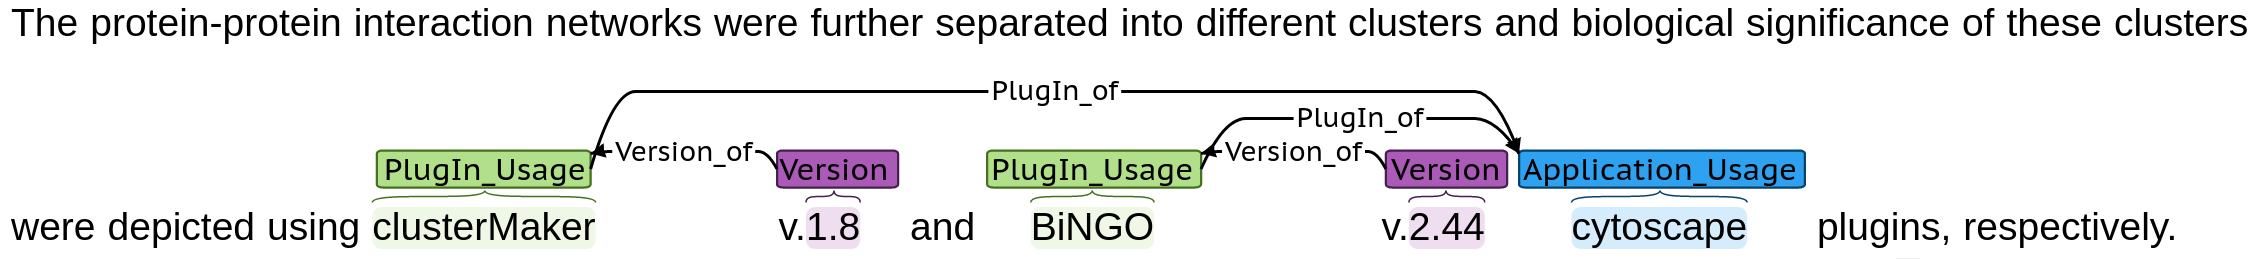 Annotated example of a software mention.